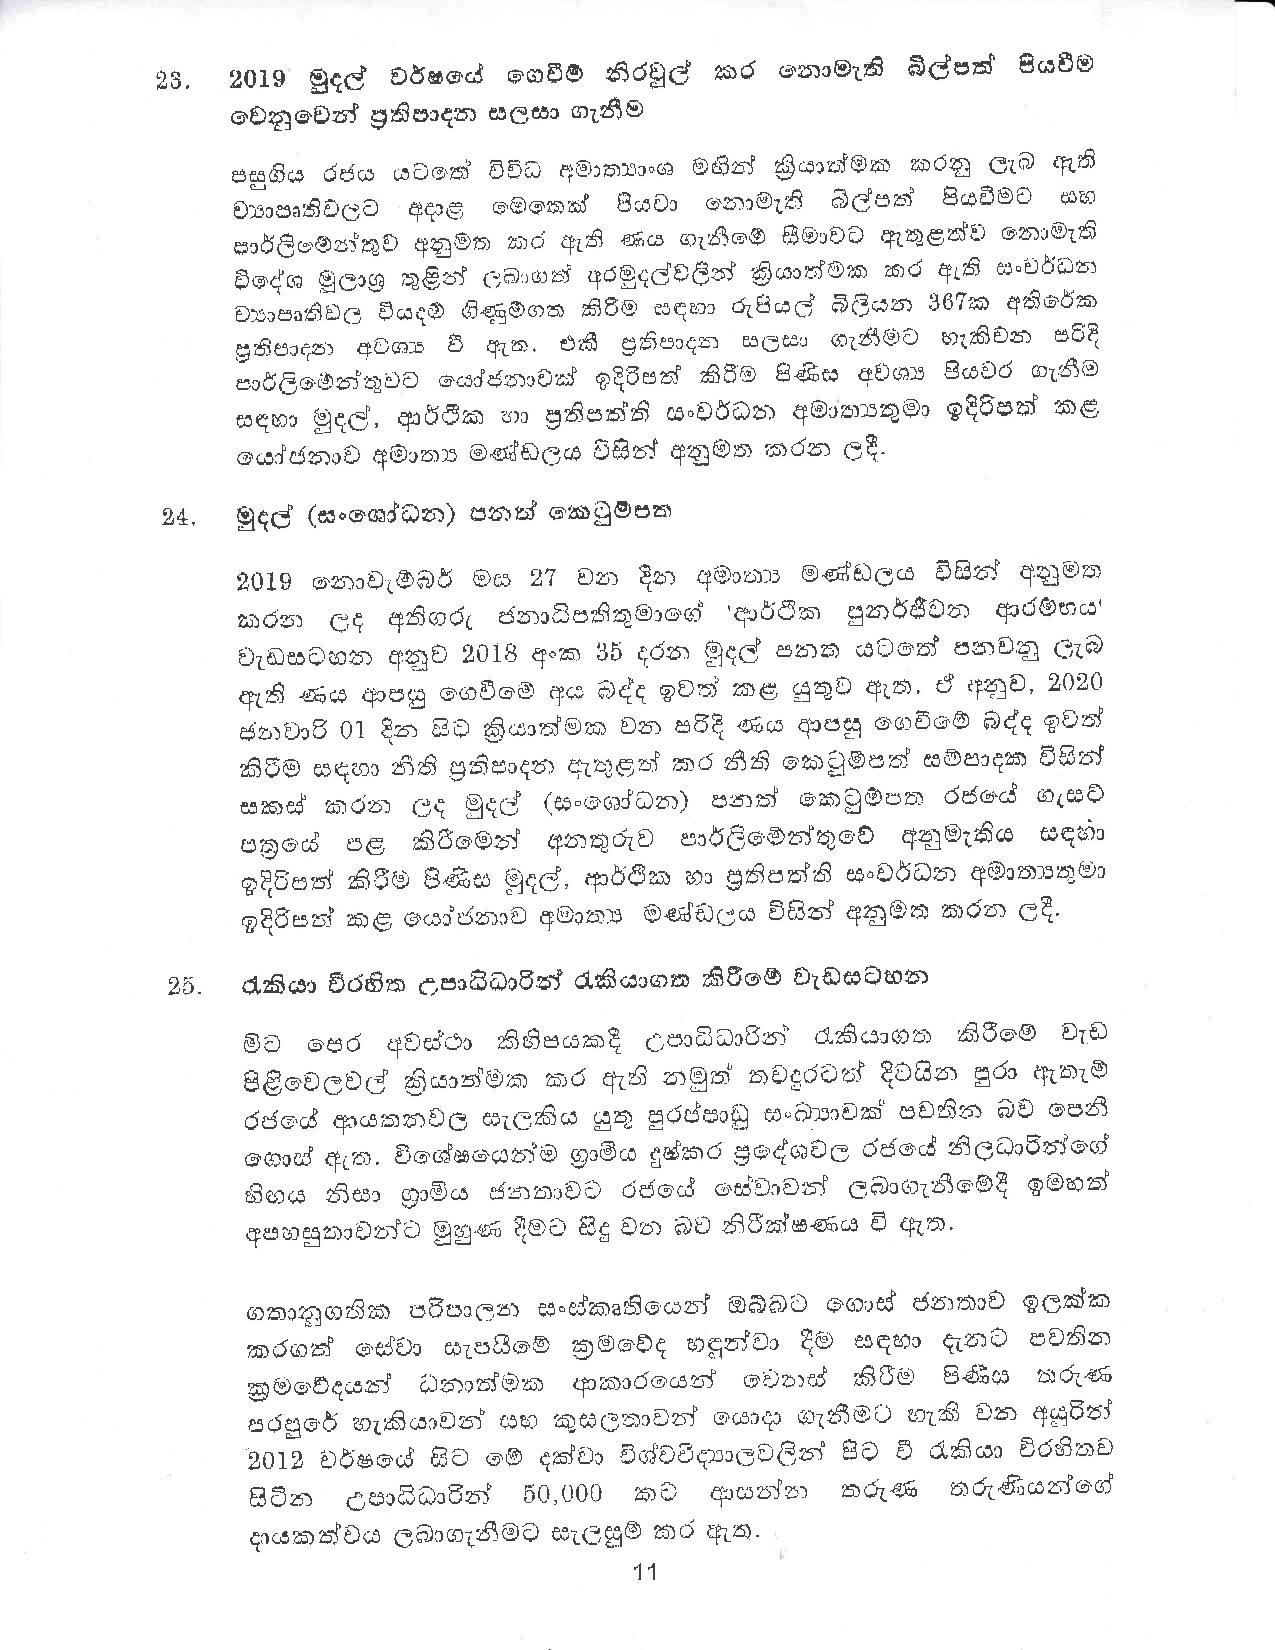 Cabinet Decision on 05.02.2020 page 011